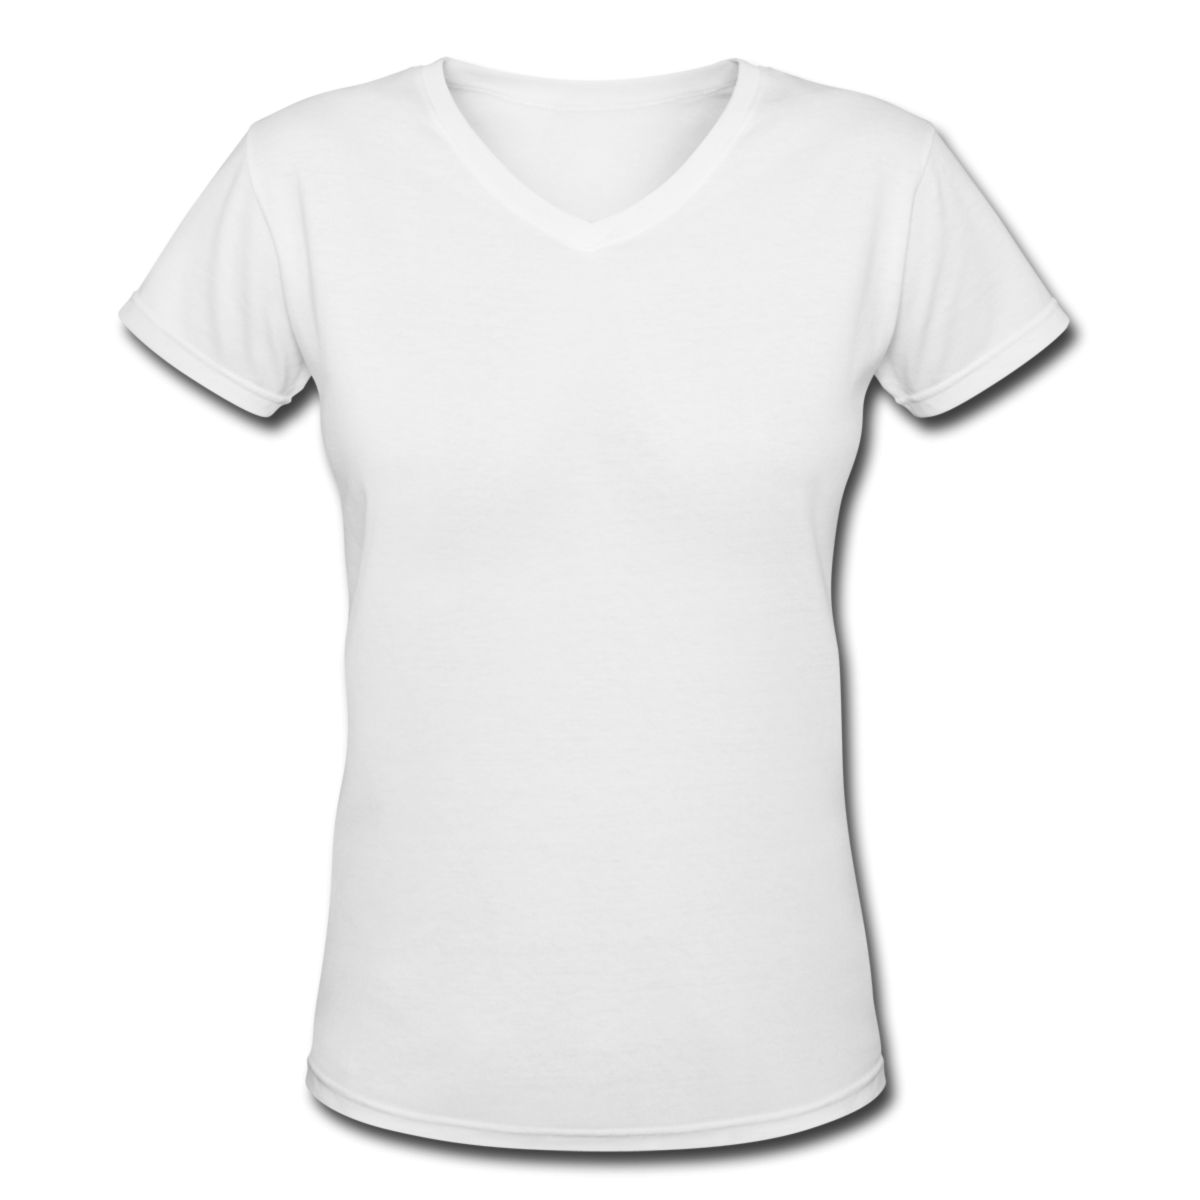 Blank T Shirt PNG, Blank T Shirt Transparent Background - FreeIconsPNG